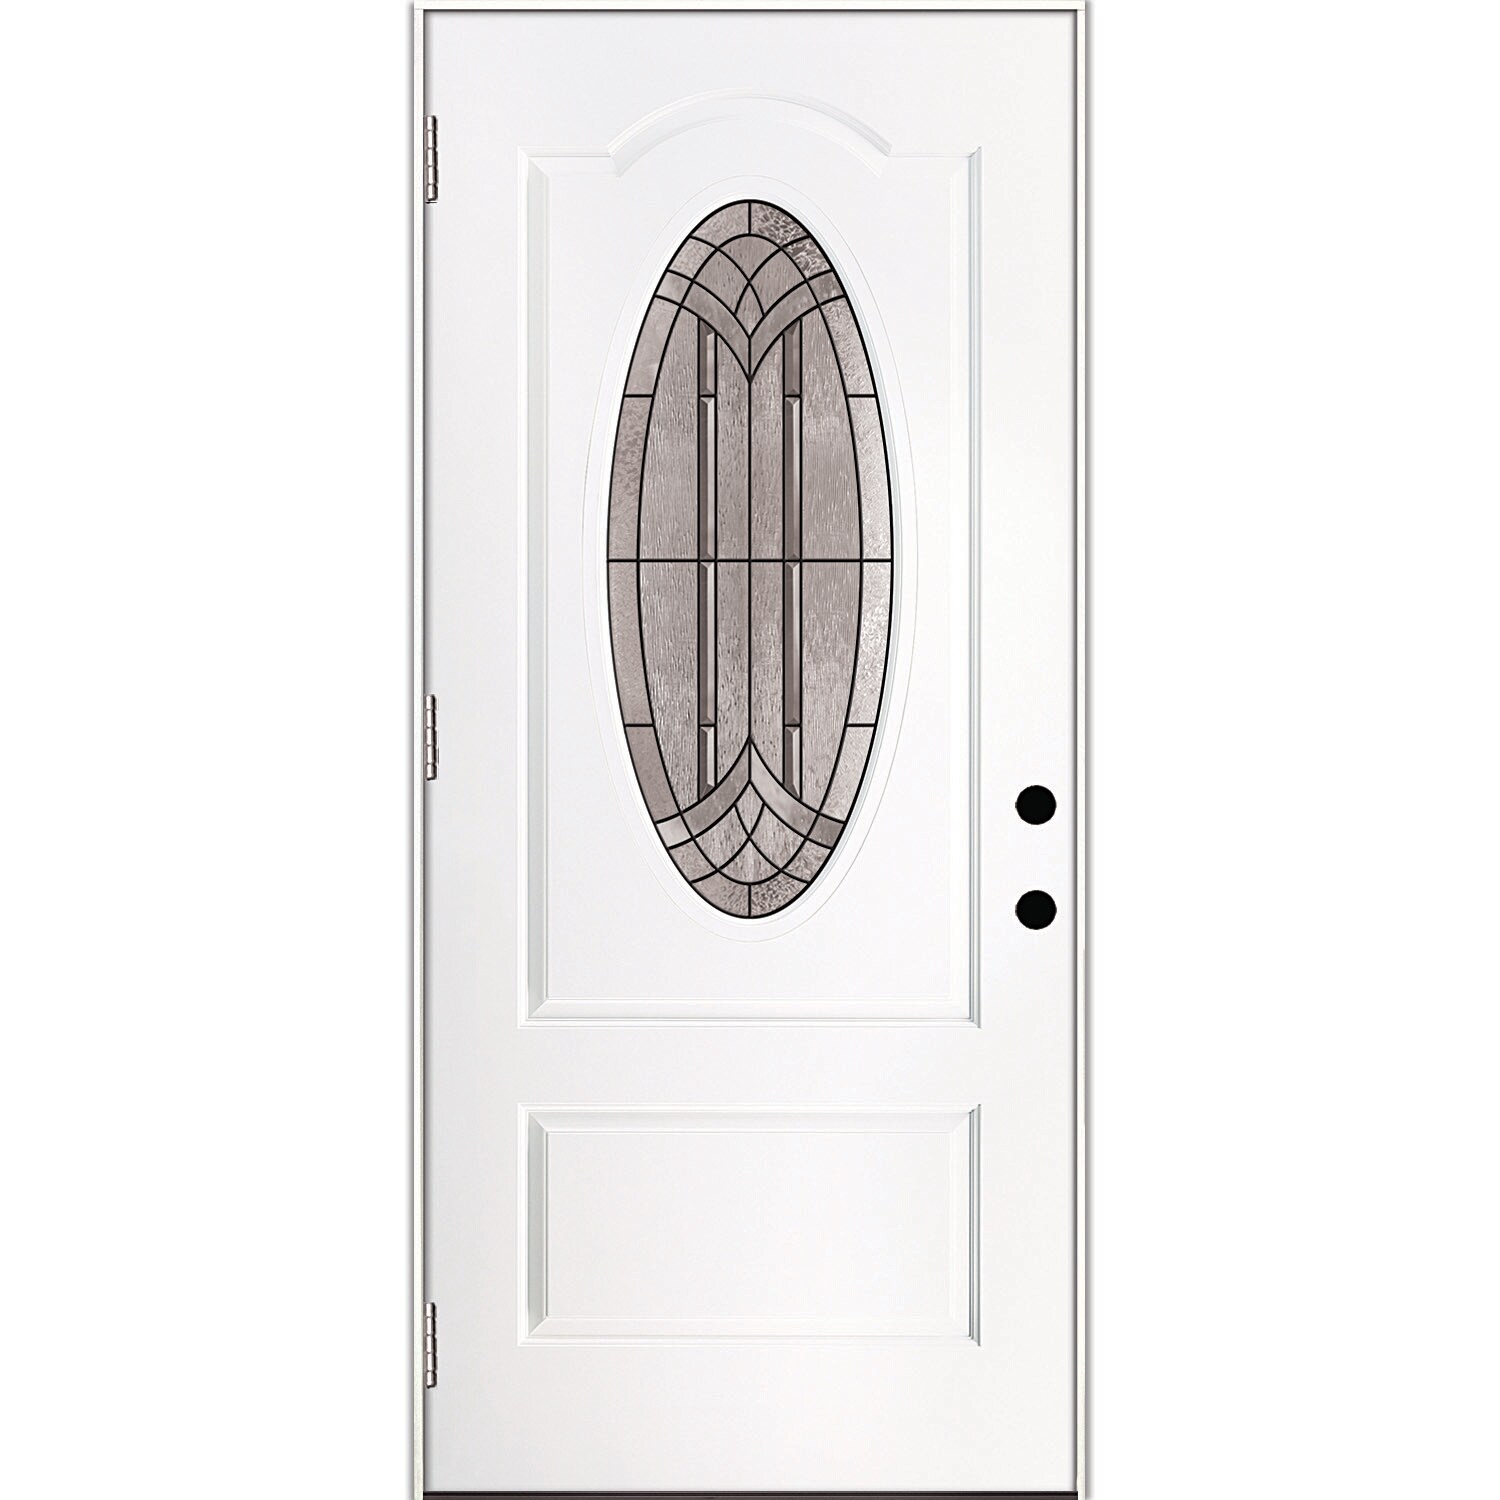 Feather River Pomona 36-in x 80-in Fiberglass Oval Lite Right-Hand Outswing Ready To Paint Prehung Single Front Door Insulating Core Stainless Steel -  FL7R38TC